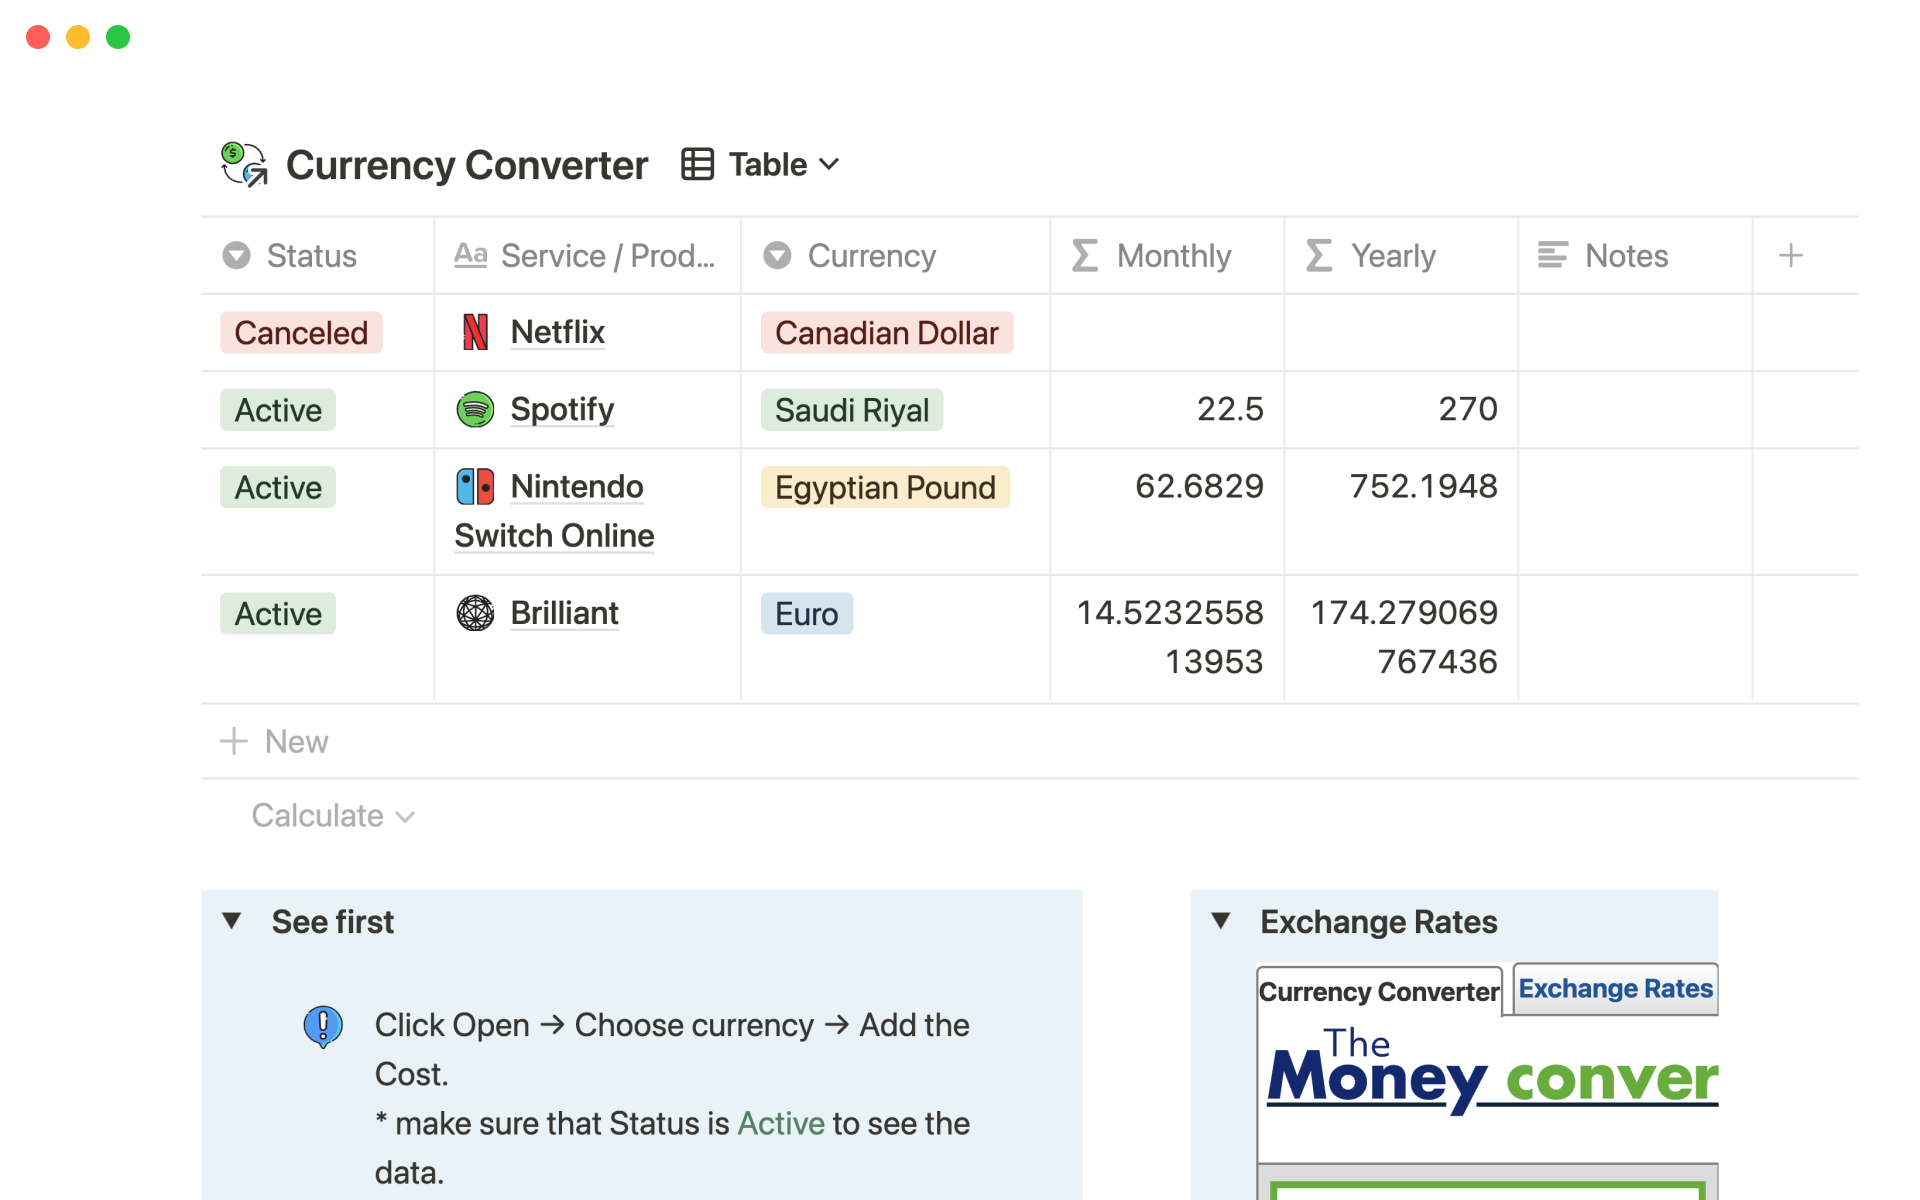 Track your subscriptions, get reminders, view timeline, and convert currencies into your own.